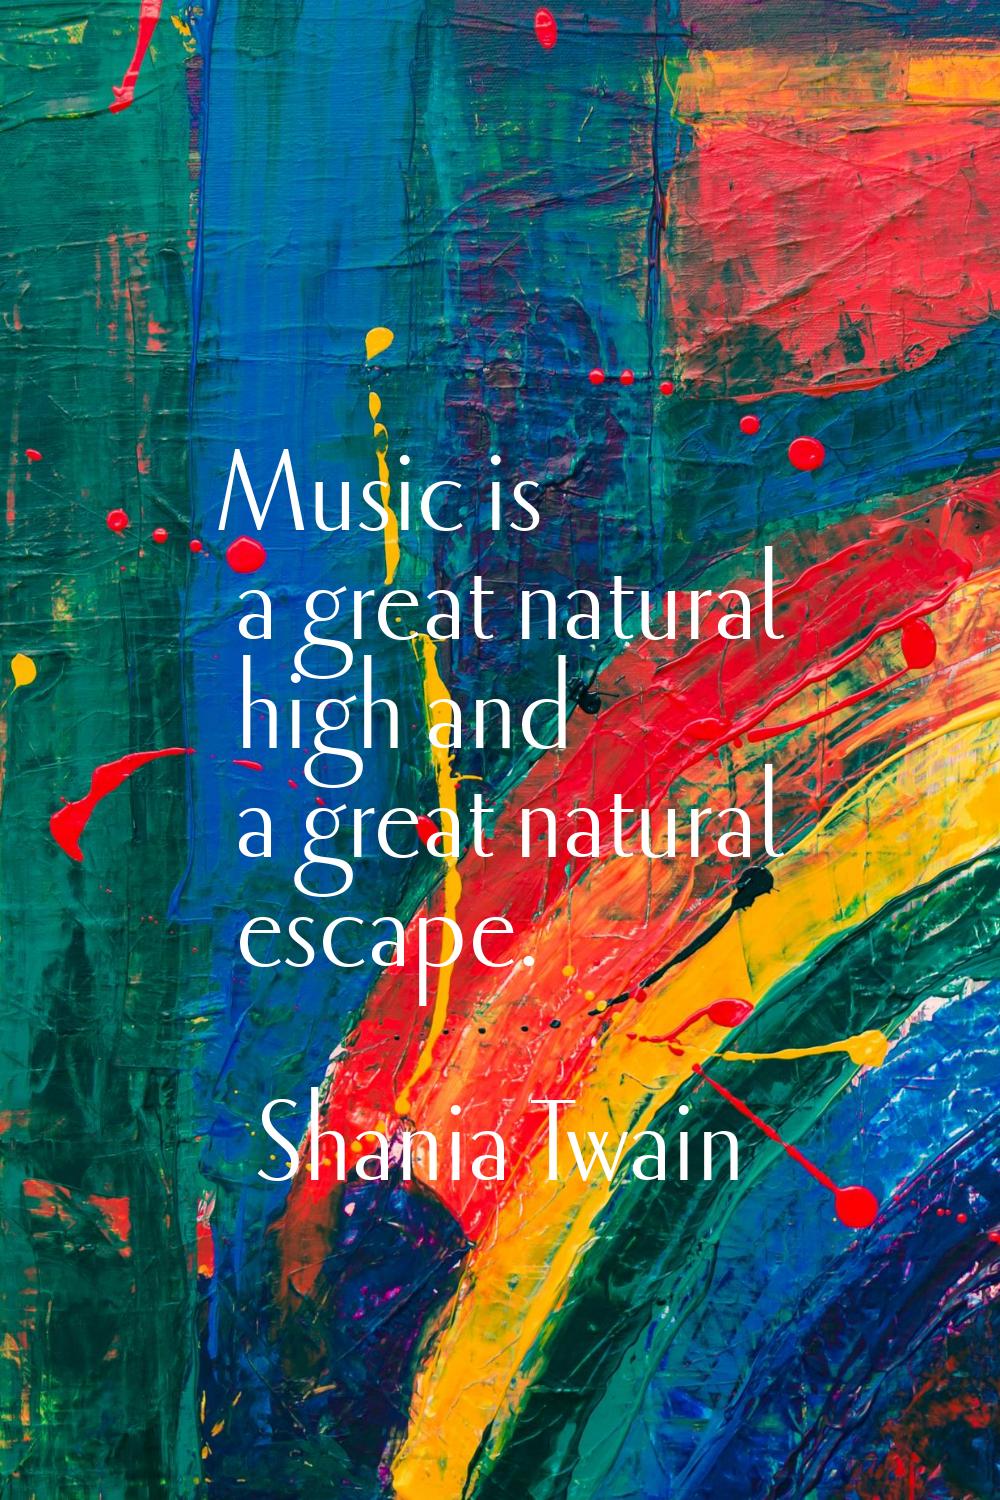 Music is a great natural high and a great natural escape.